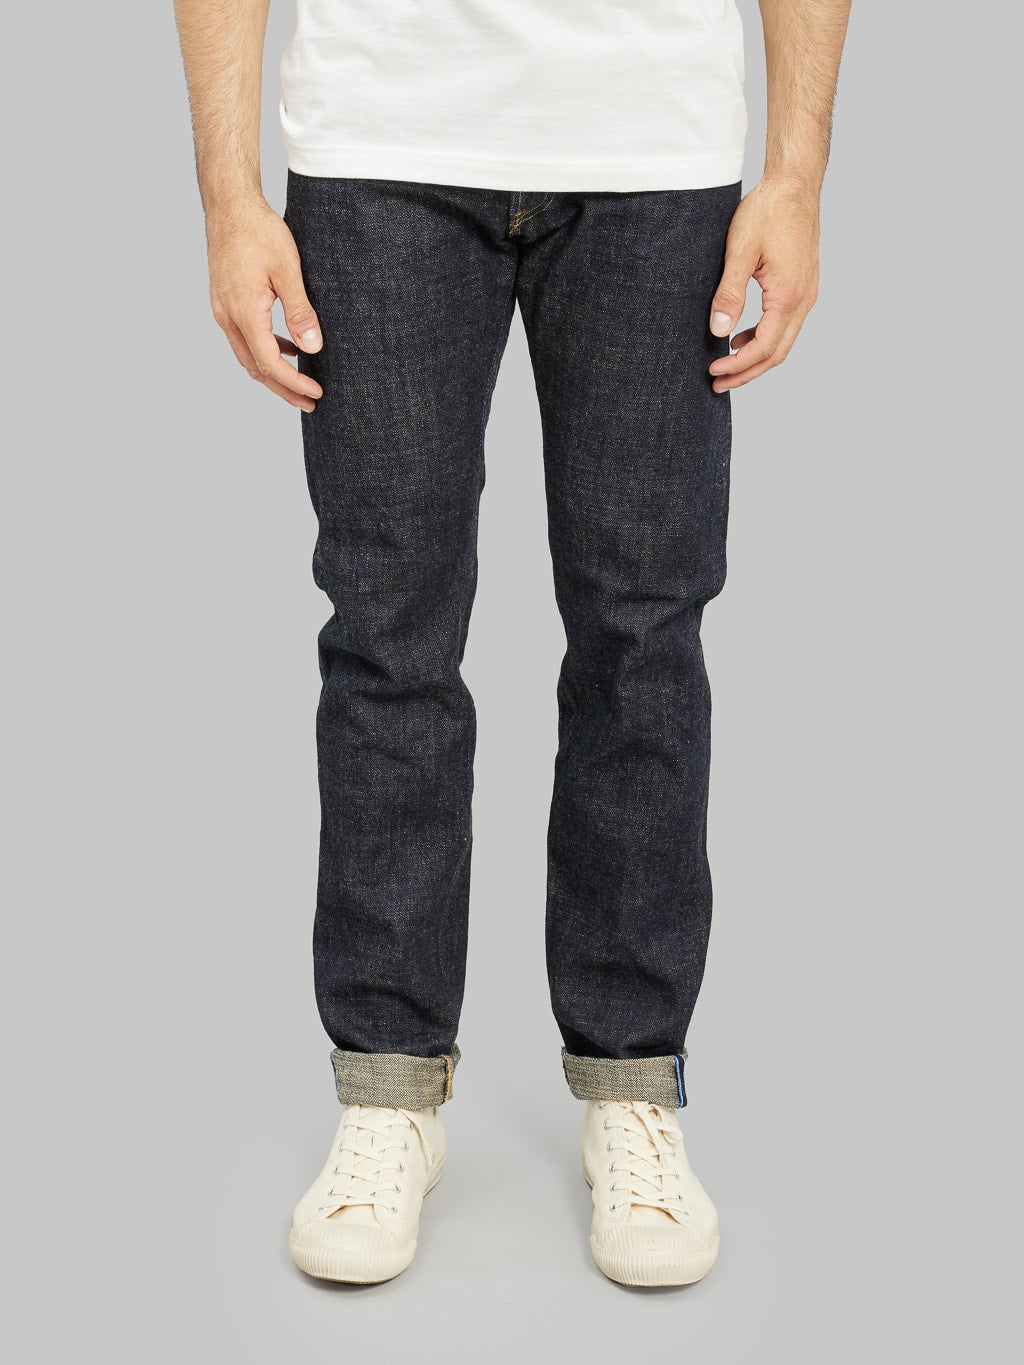 Tanuki Zetto Benkei High Tapered Jeans front fit